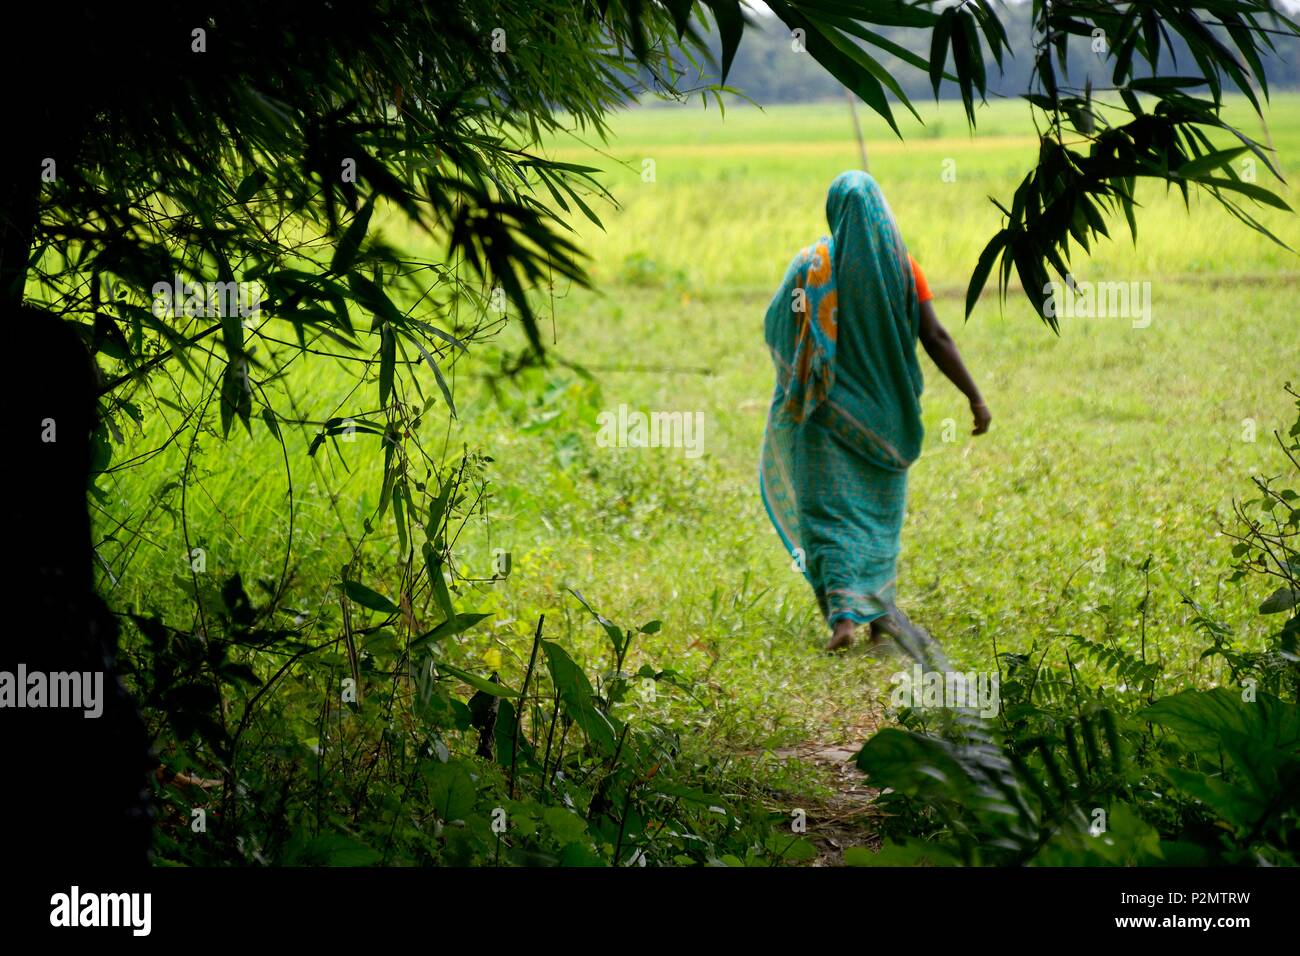 Bangladesh, Manikganj, an entrepreneur member of the Manikganj microfinance network, become the owner of a field thanks to income from her business supported by the NGO BRAC which has over 100,000 employees, mostly women Stock Photo